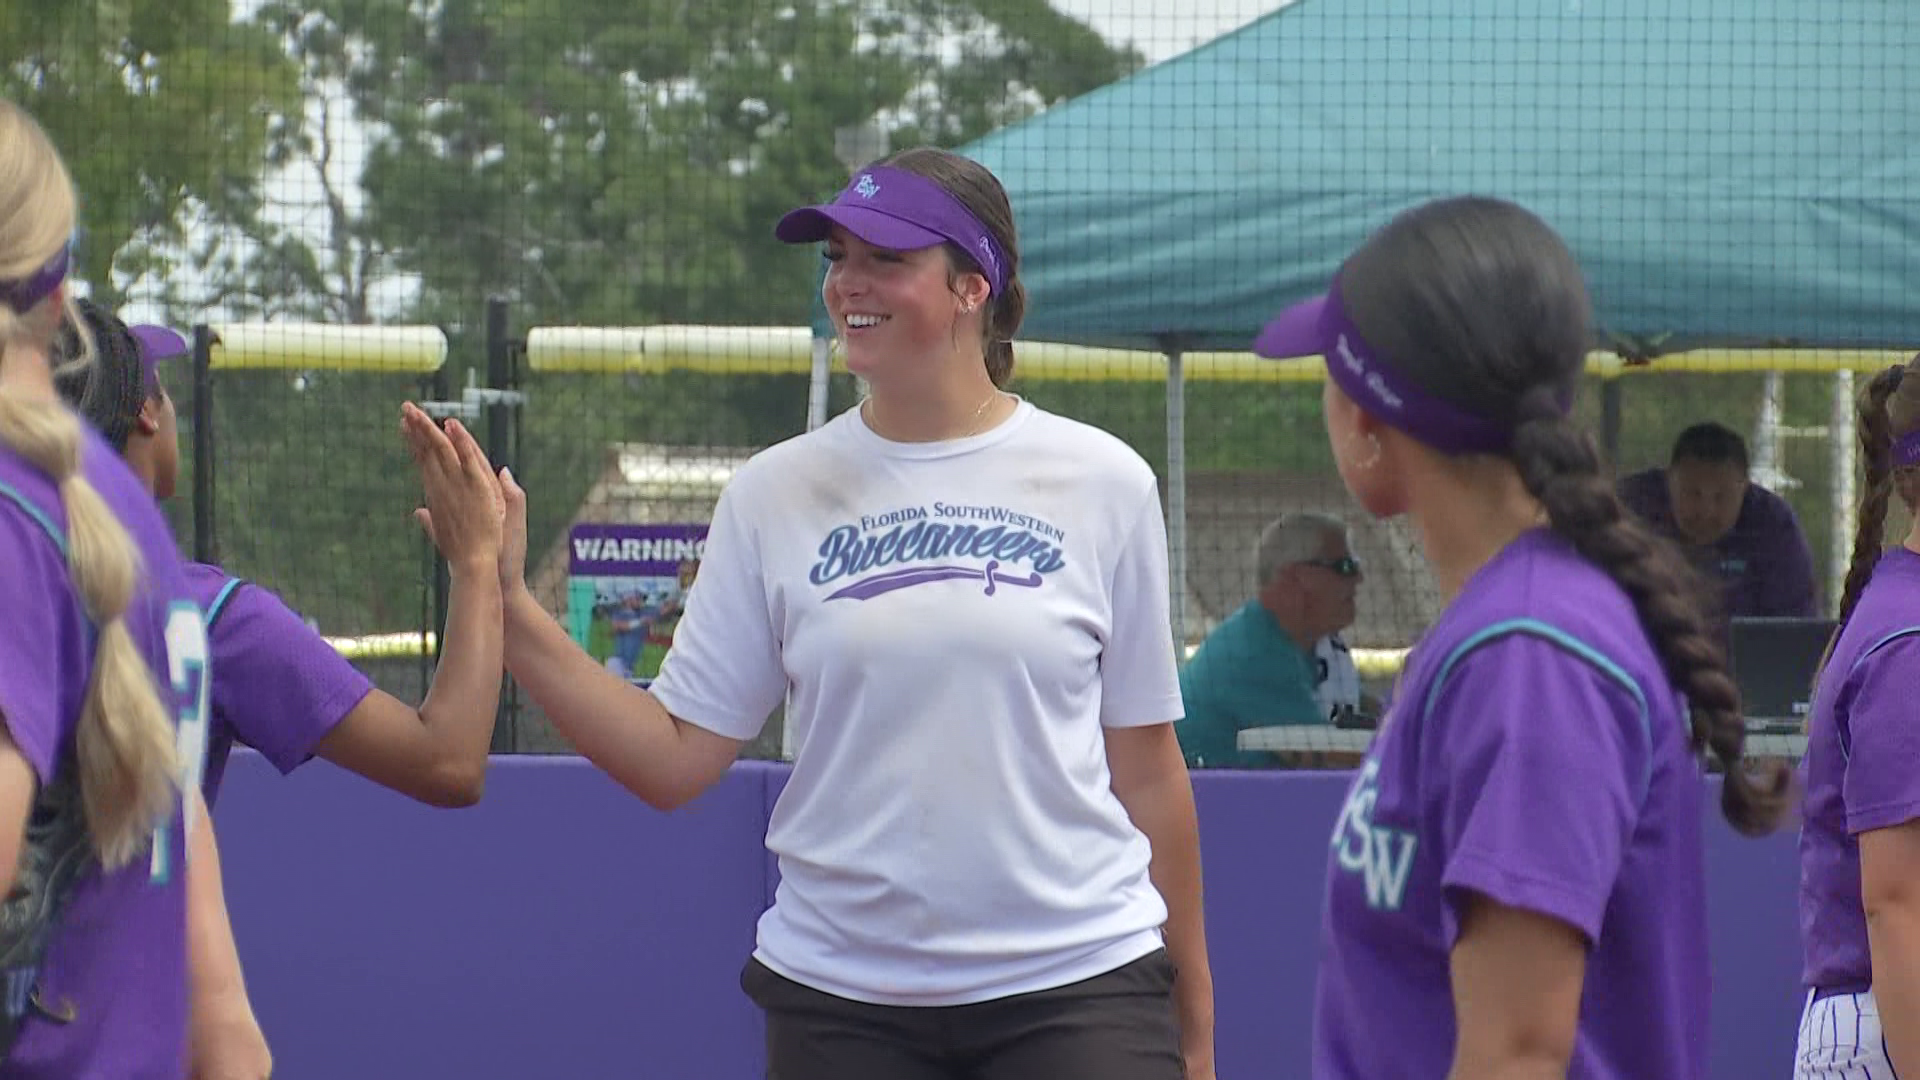 FSW softball player embarks on unfinished business in Louisiana